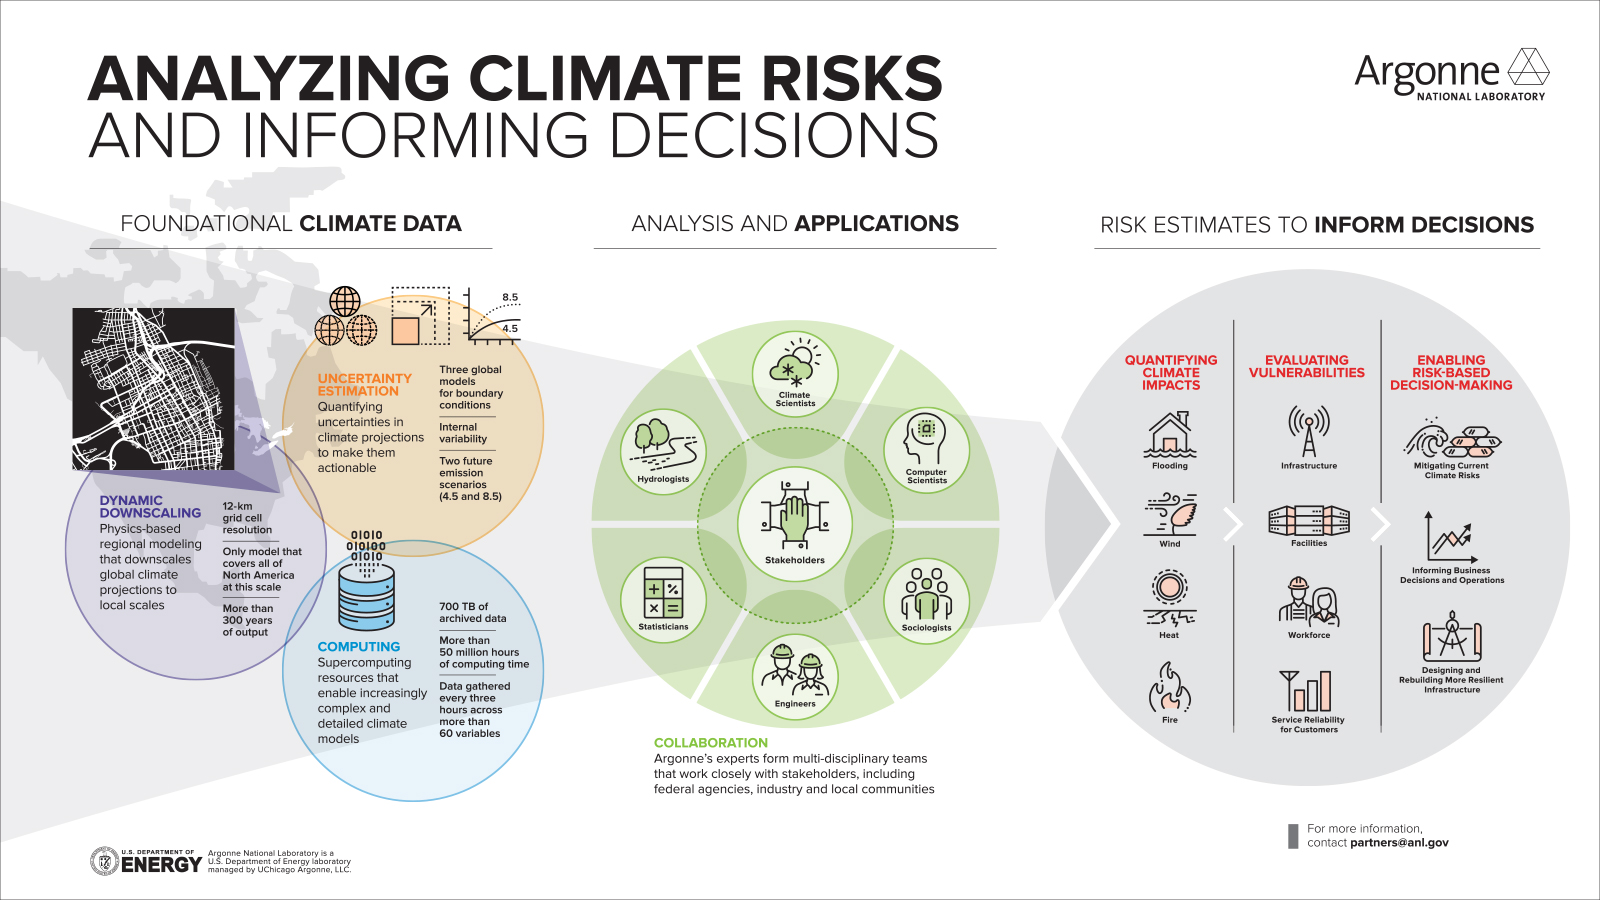 Argonne helps organizations with extensive infrastructure better prepare for and adapt to the impacts of climate change and extreme weather events. (Image by Argonne National Laboratory.)